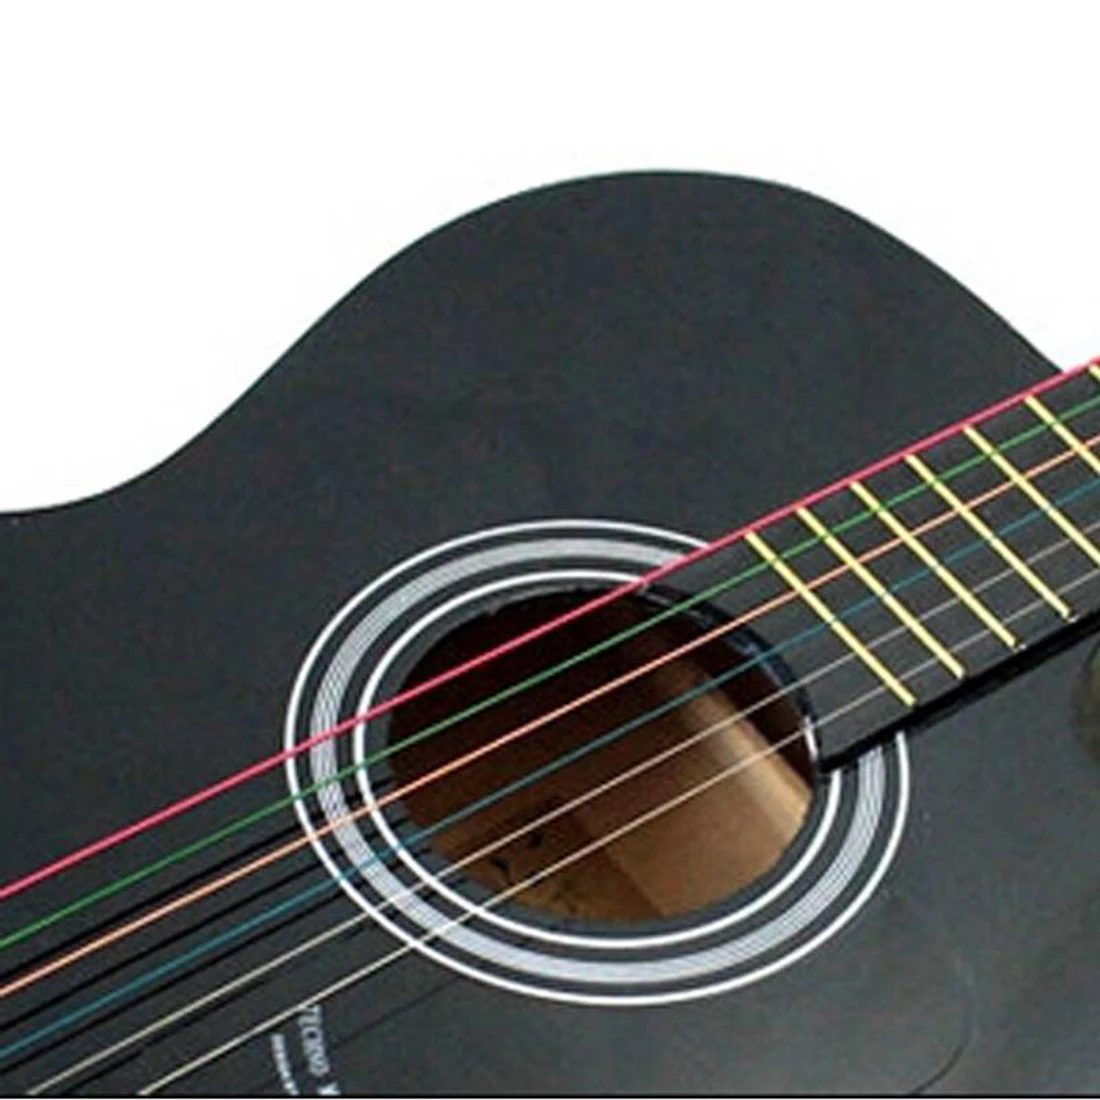 

High Quality Ancient Music Player Guitar Strings Rainbow Strings 6Pcs Latest Guitar Accessories